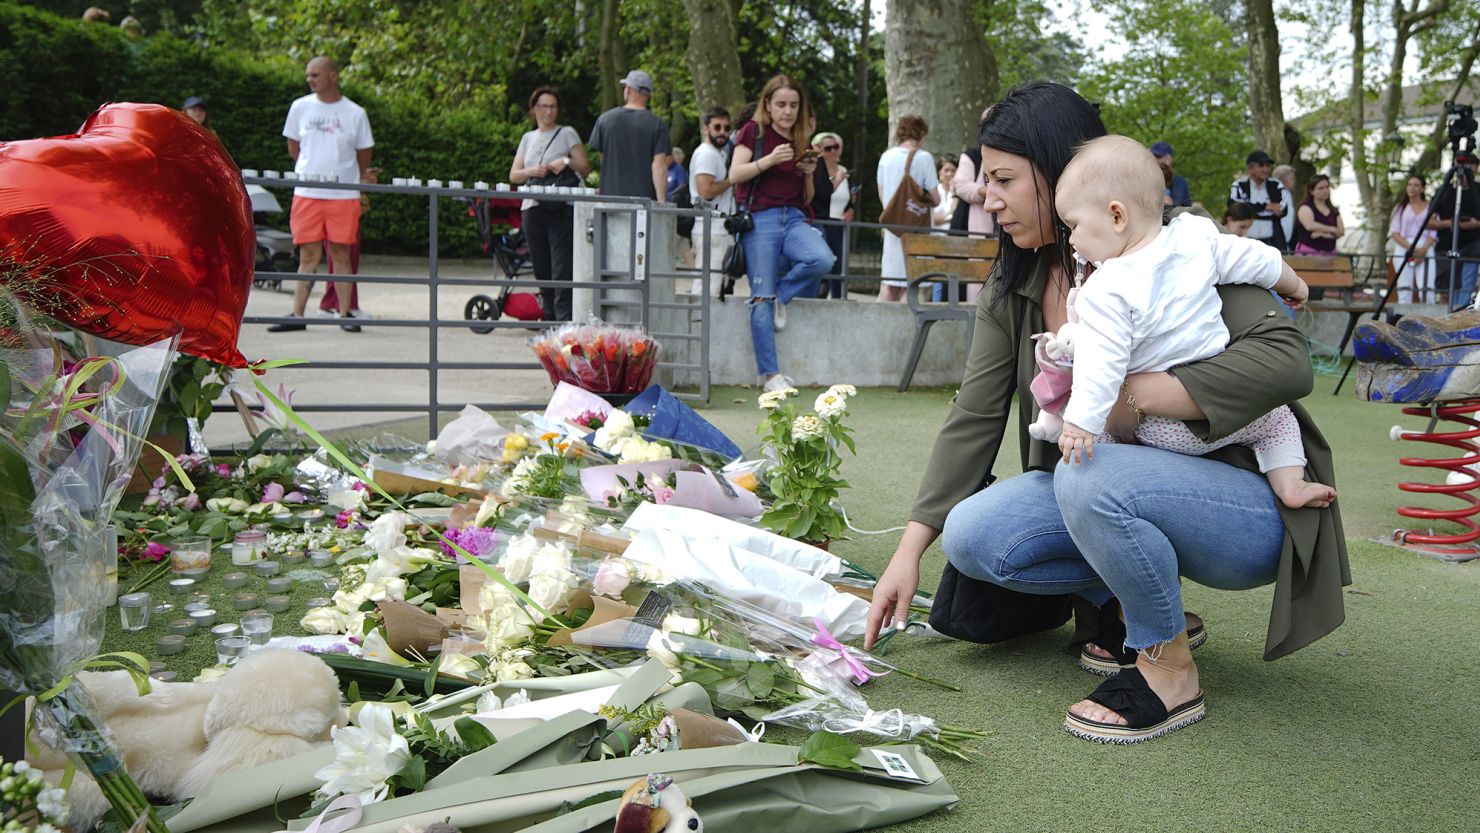 A woman holding a baby lays flowers near the scene at a lakeside park in Annecy, France, where four children and two adults were wounded in a knife attack on Thursday.